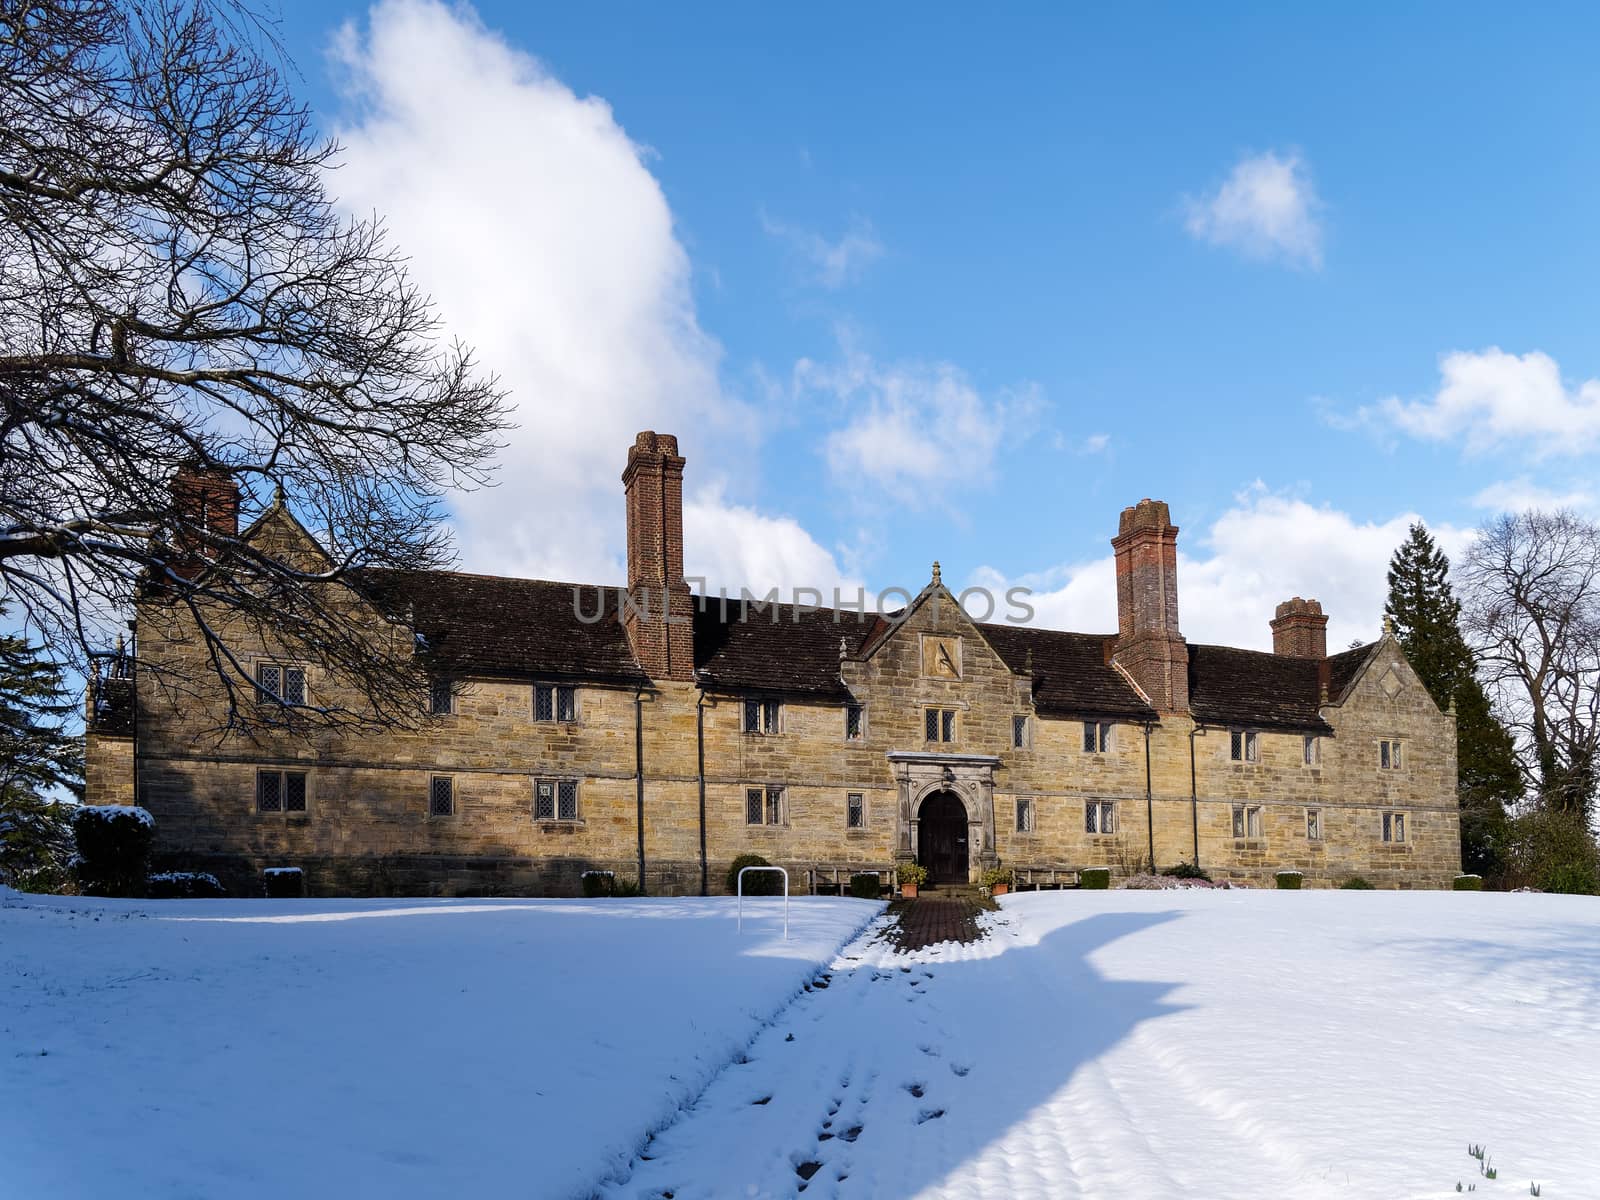 EAST GRINSTEAD, WEST SUSSEX/UK - FEBRUARY 27 : Sackville College in East Grinstead on February 27, 2018